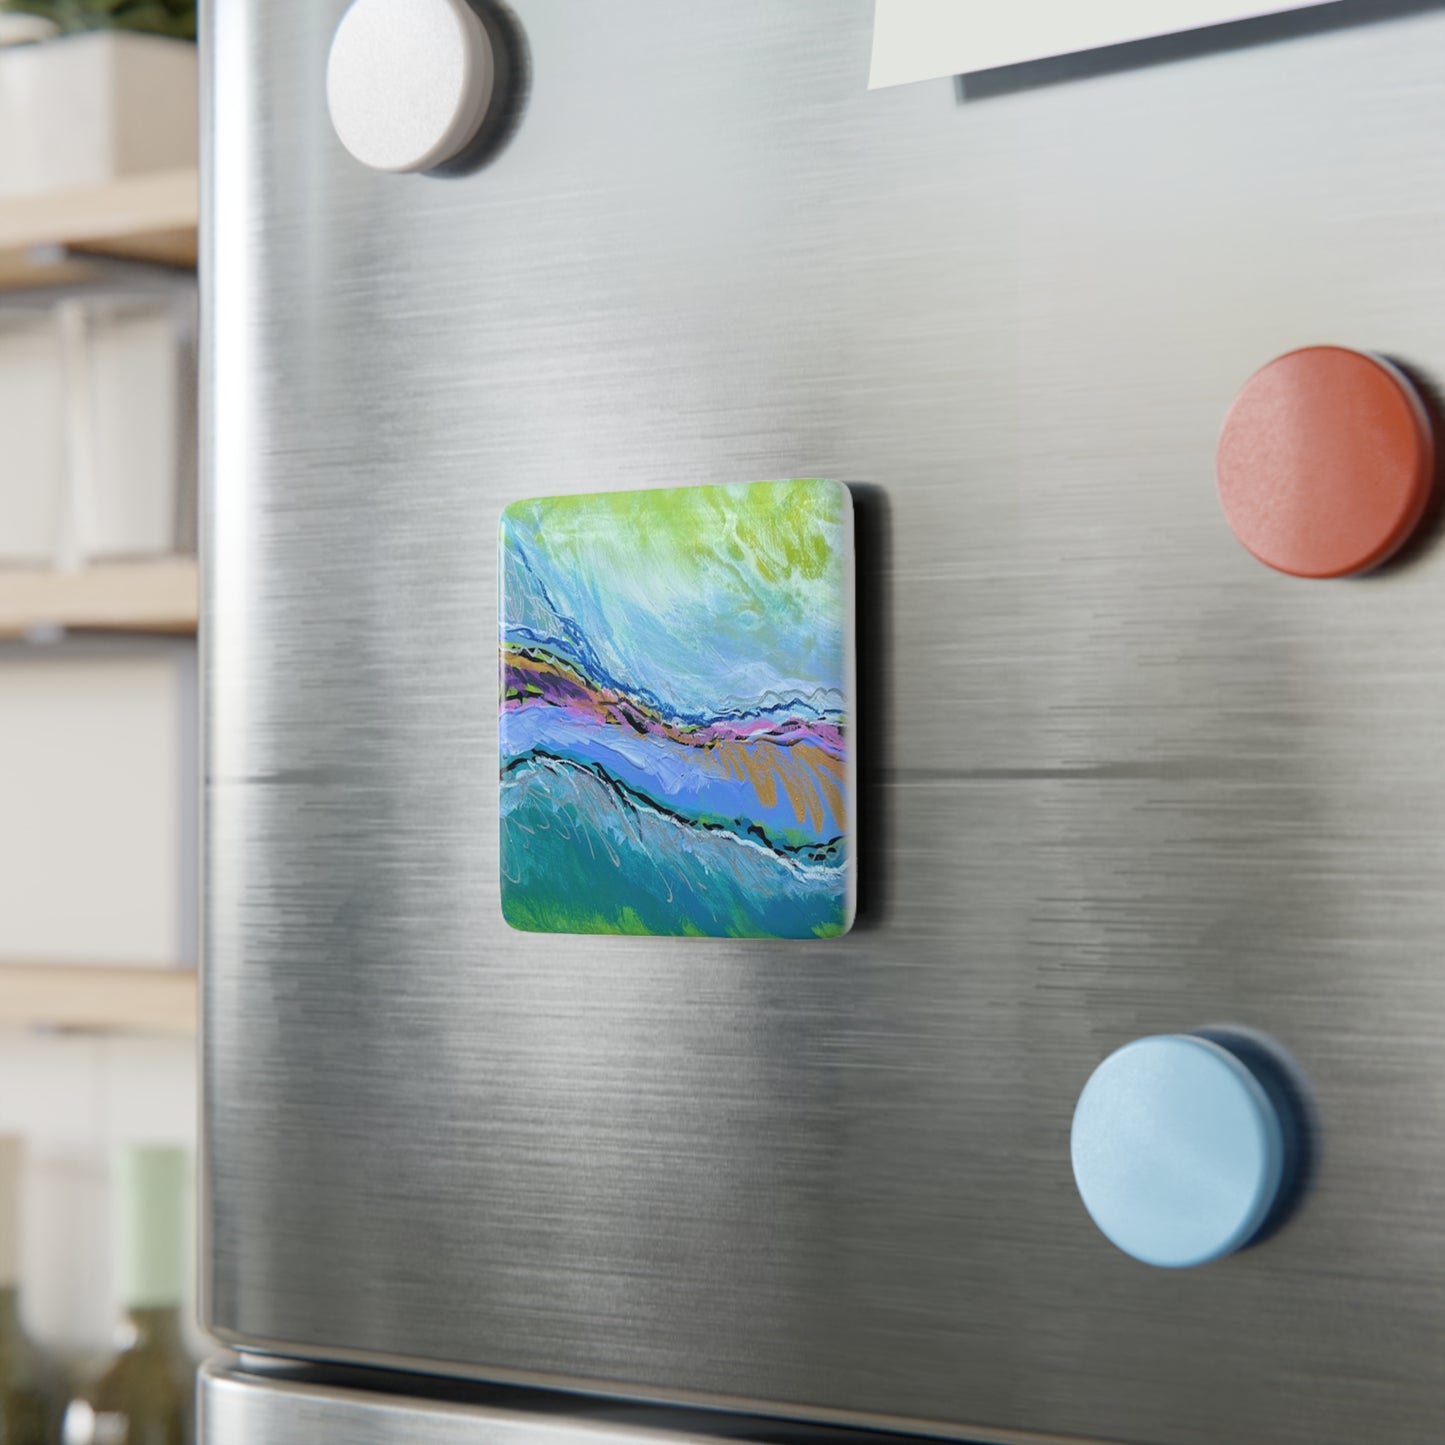 Abstract Me Painting Refrigerator Decorative Porcelain Magnet, Square